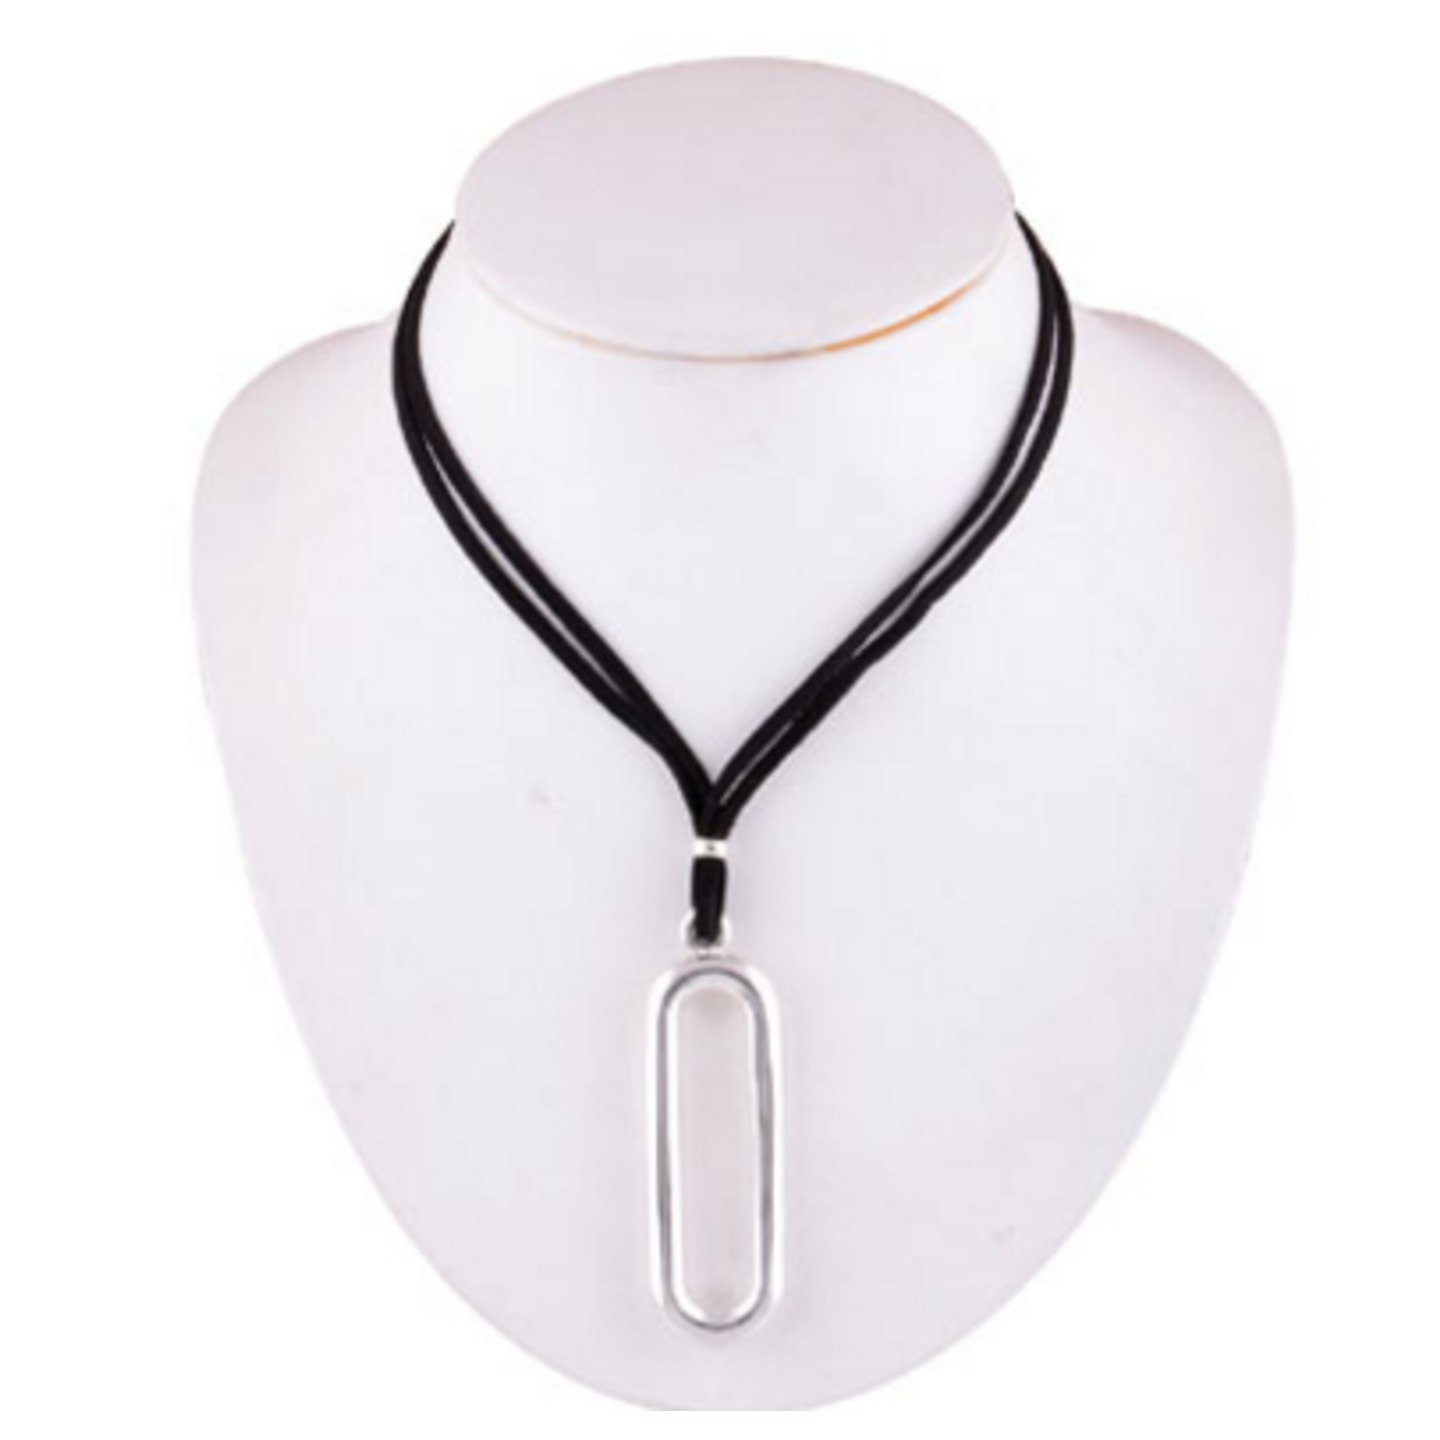 The Loop Silver Necklace